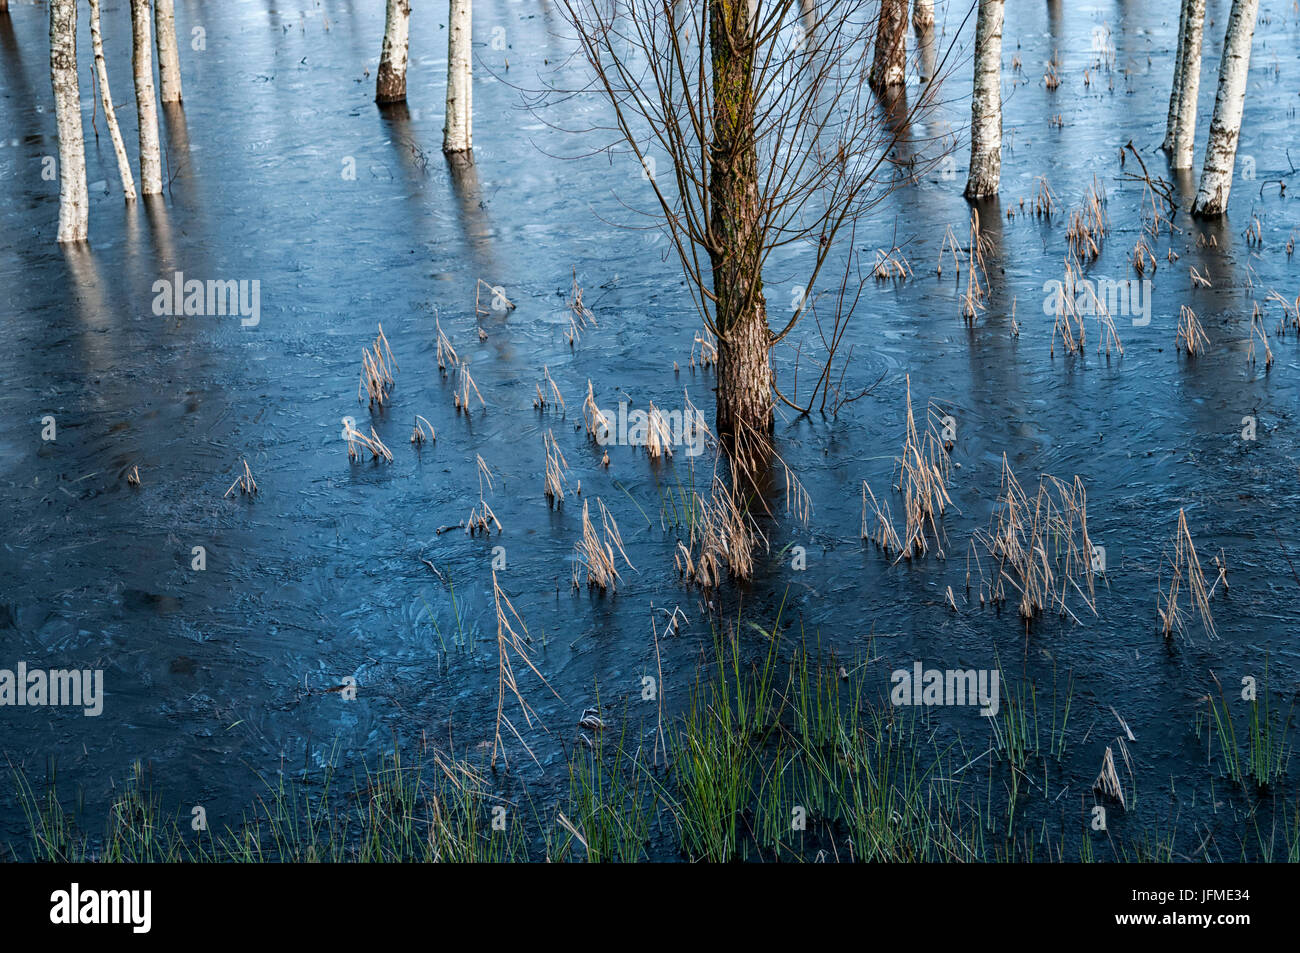 Natural Science, Frozen in ice, trees and grass Stock Photo